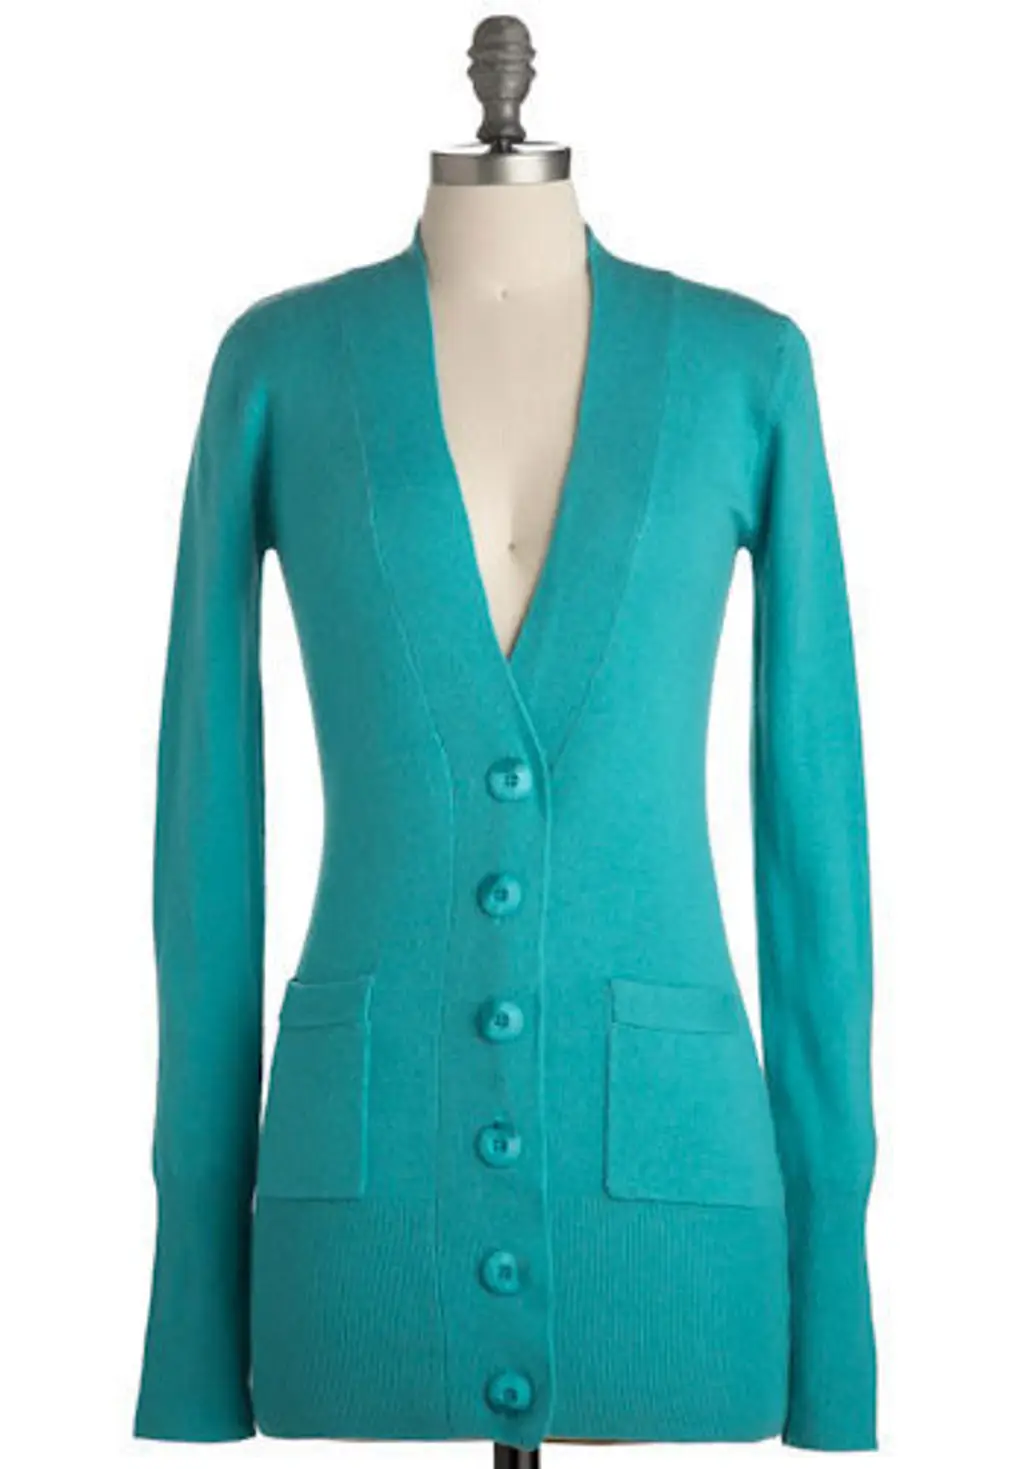 Be Teal My Heart Cardigan